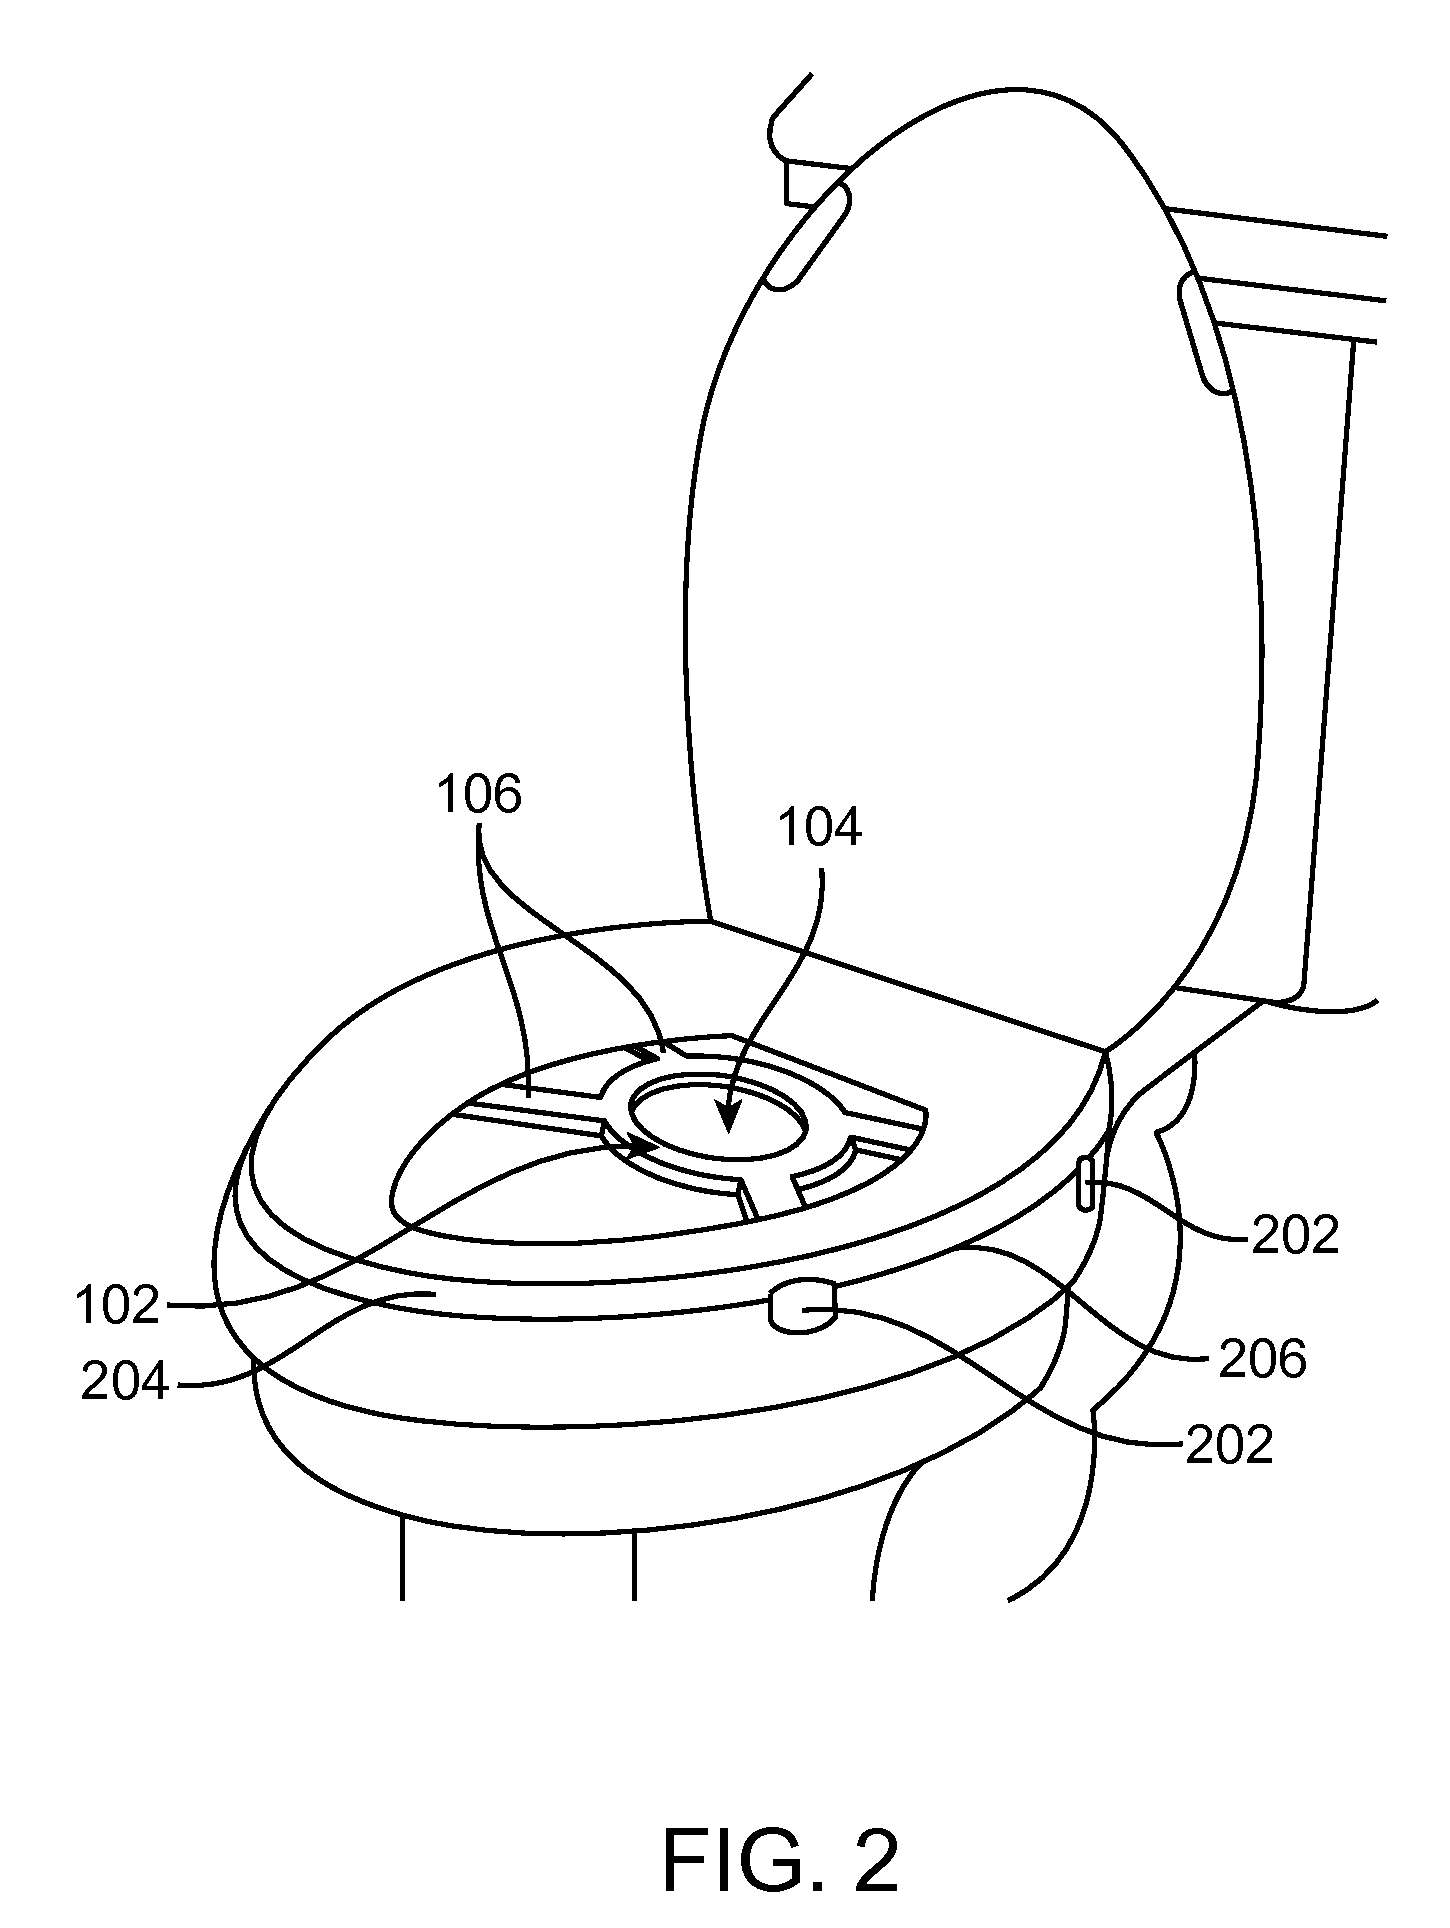 Device for the collection, refinement, and administration of gastrointestinal microflora